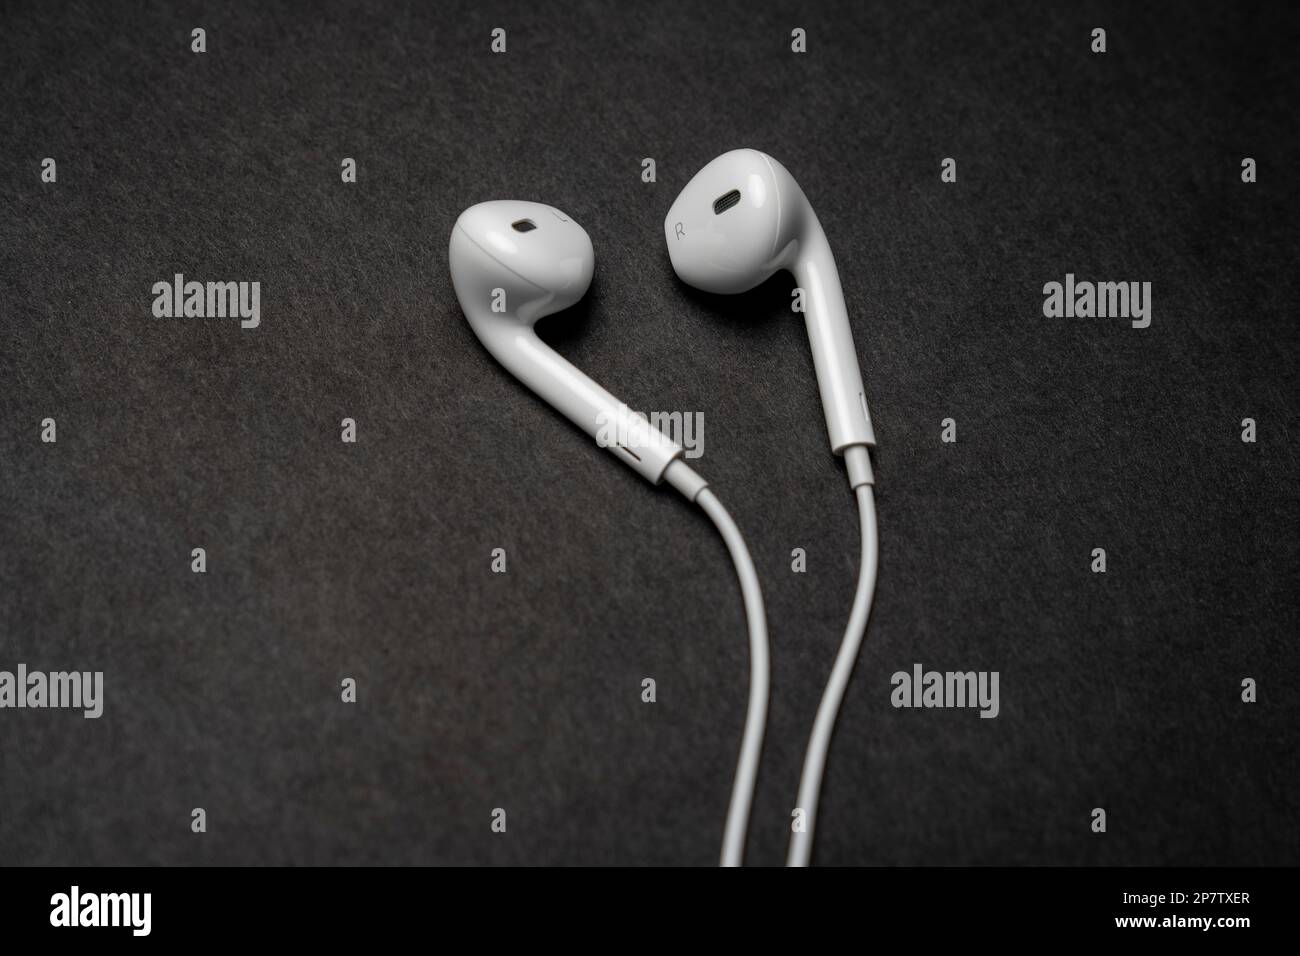 iPhone Apple Earpods, Airpods white earphones, headphones for listening to music and podcasts. Isolated black background. Stock Photo